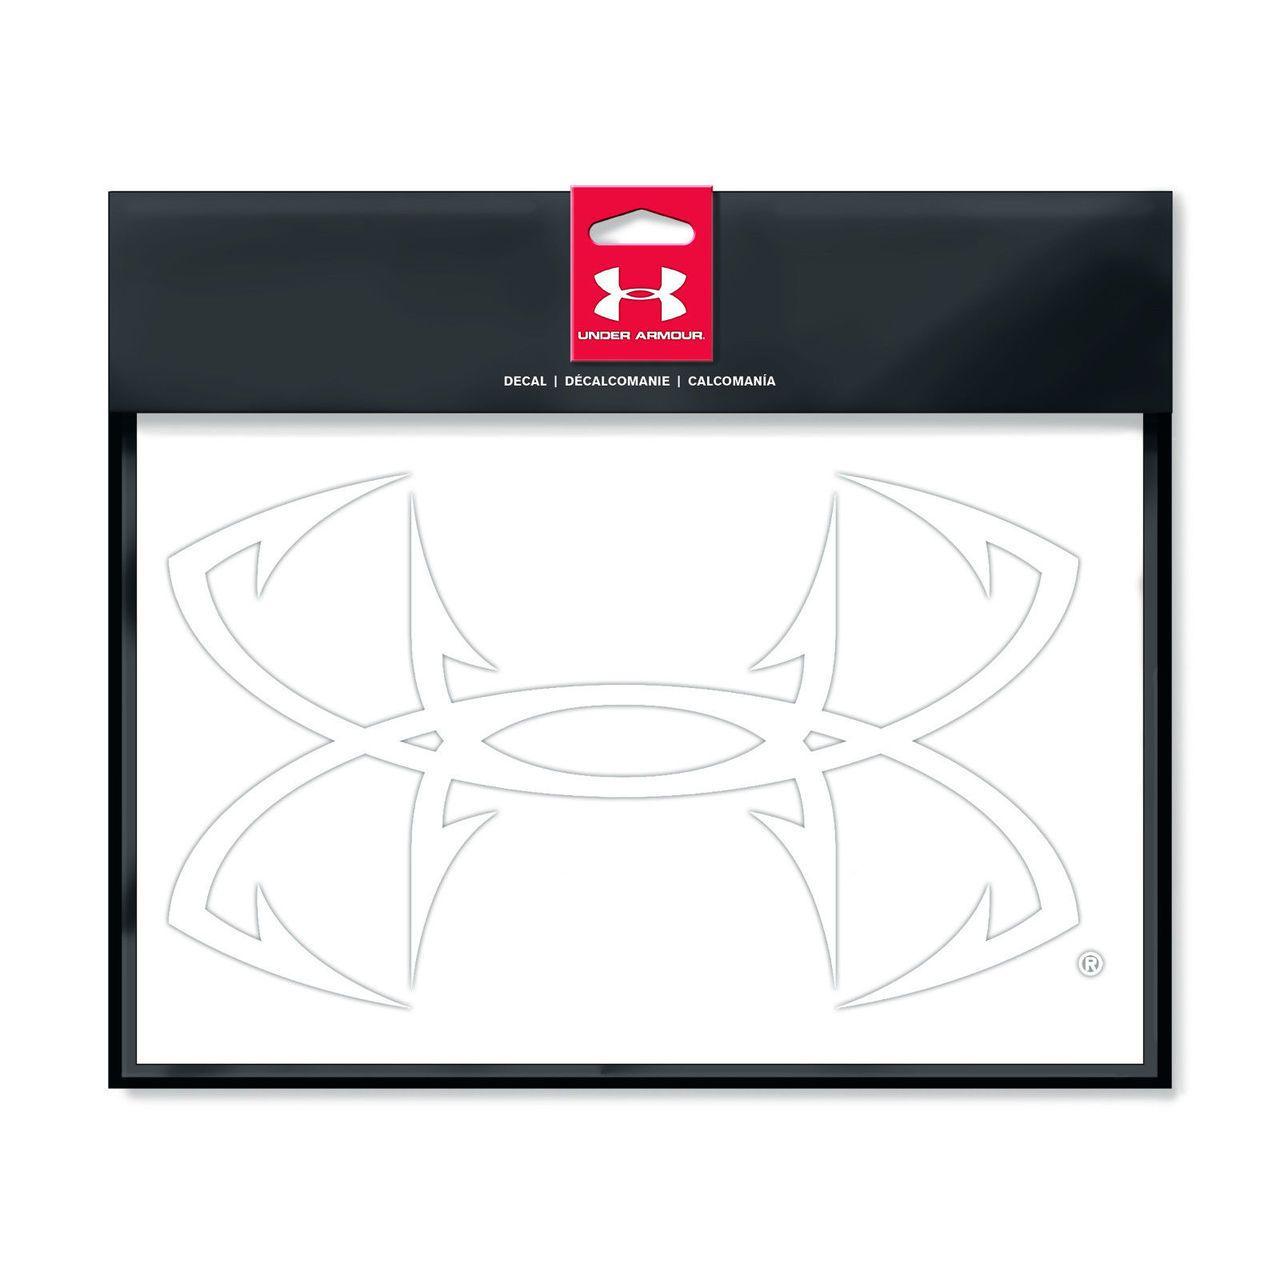 Under Armour Fish Hook Logo - Under Armour Fish Hook Logo 12 Decal (White) UDE1309